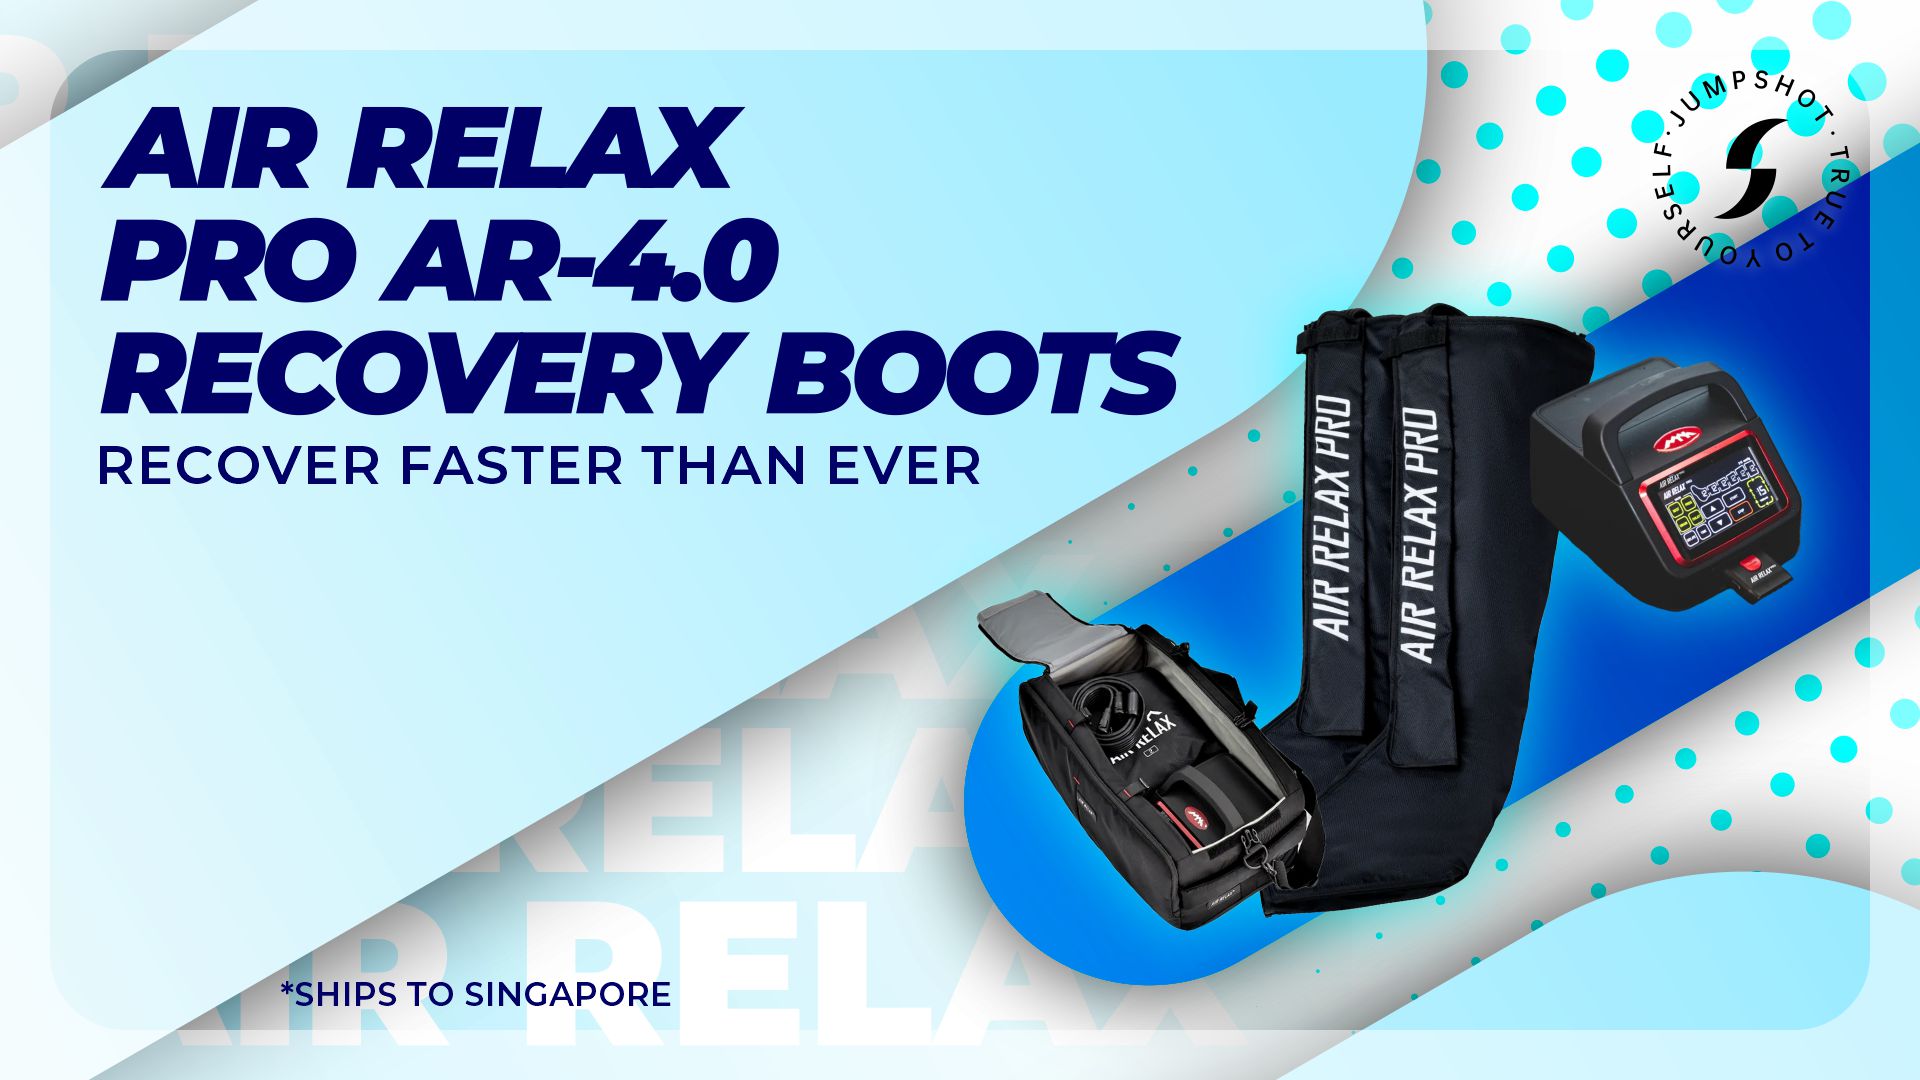 Air Relax Pro AR 4.0 Leg Recovery System